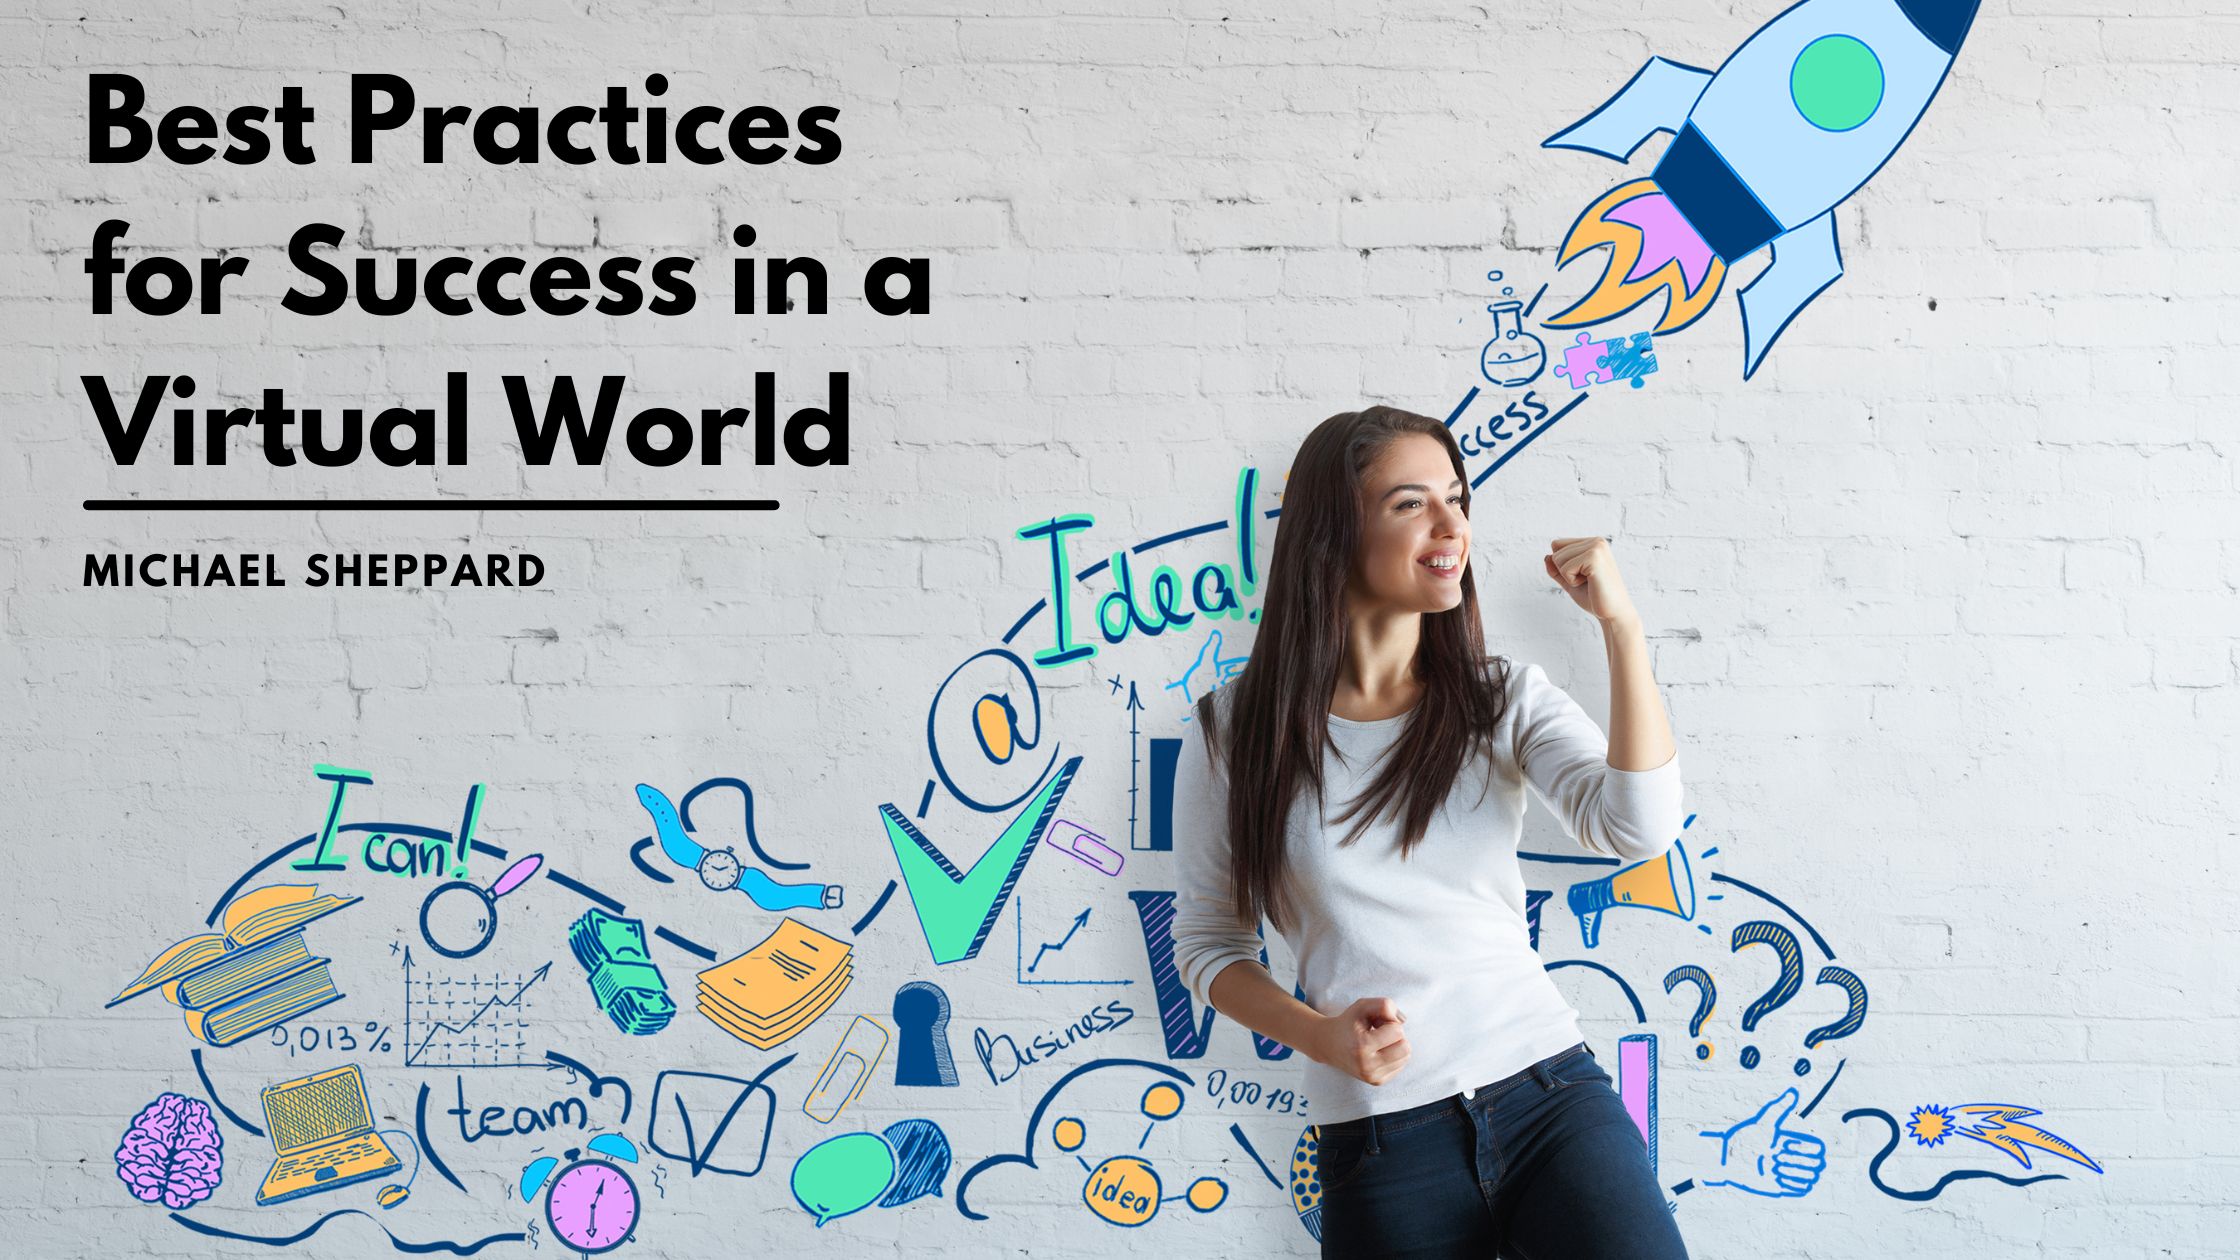 Best Practices for Success in a Virtual World